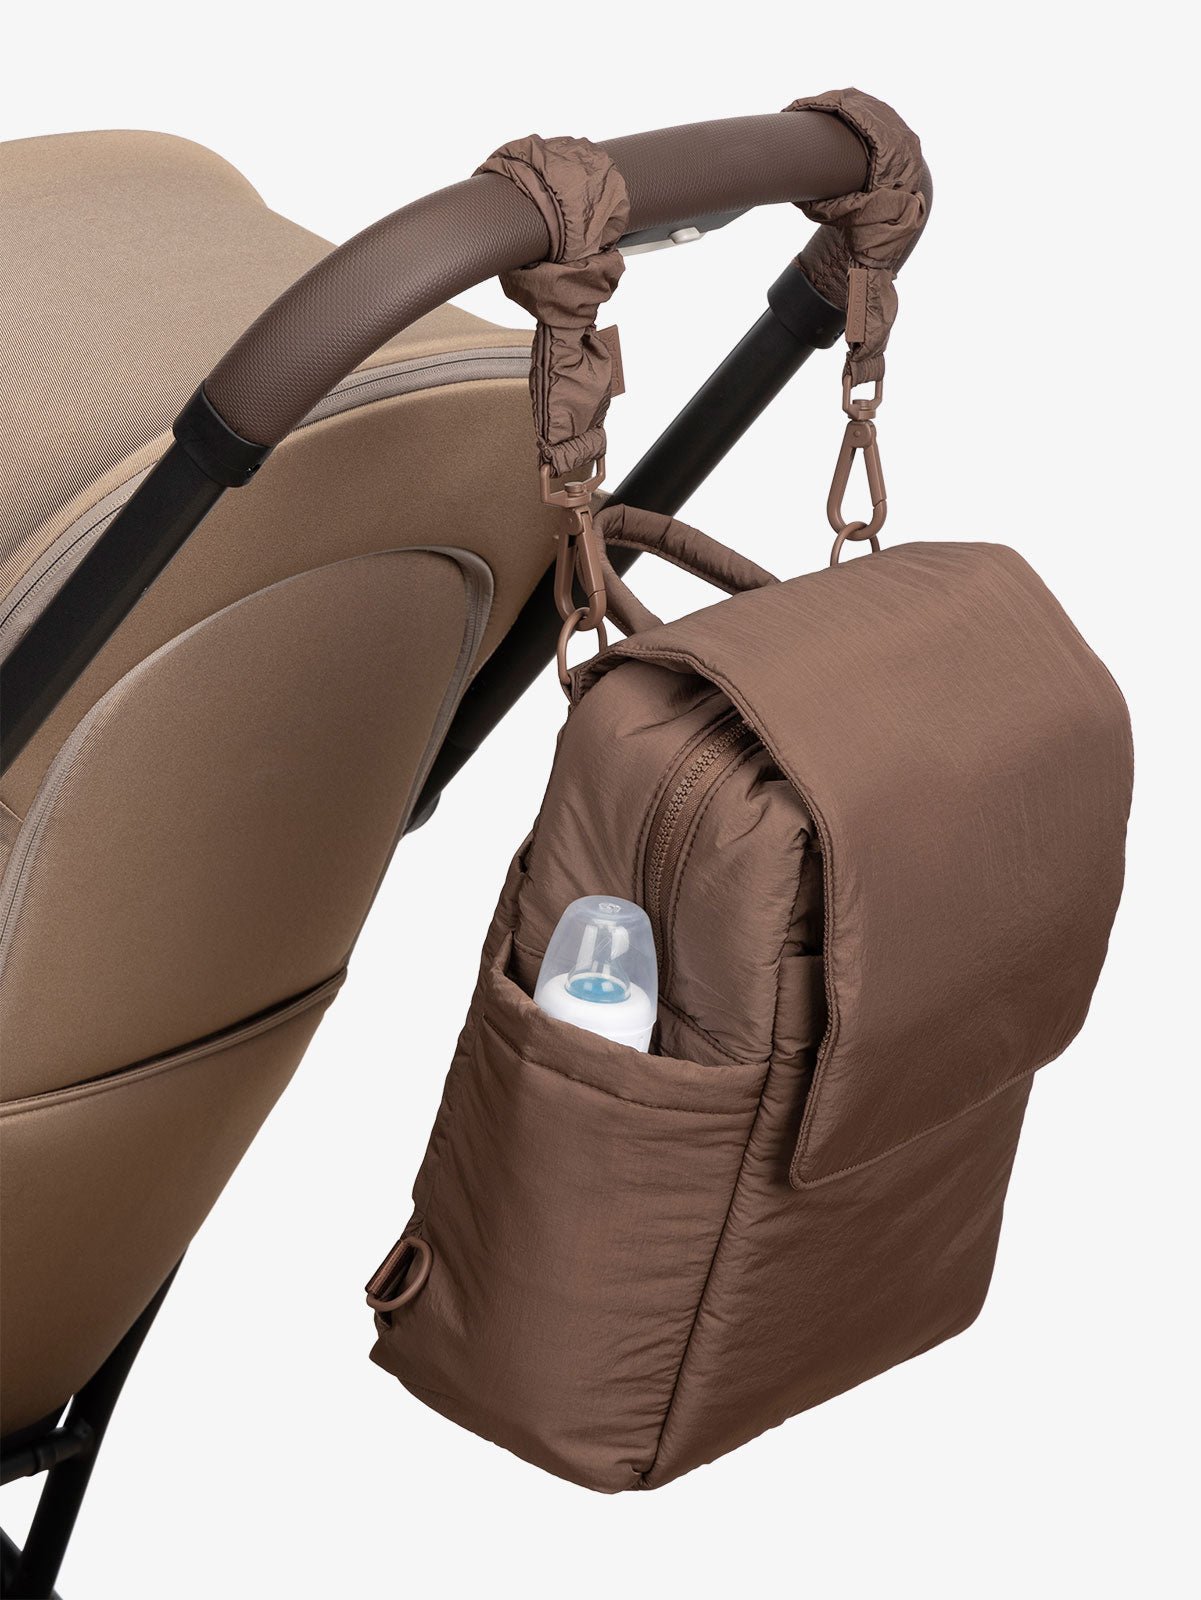 CALPAK Convertible Mini Diaper Backpack attached to stroller by CALPAK Stroller Straps in hazelnut brown